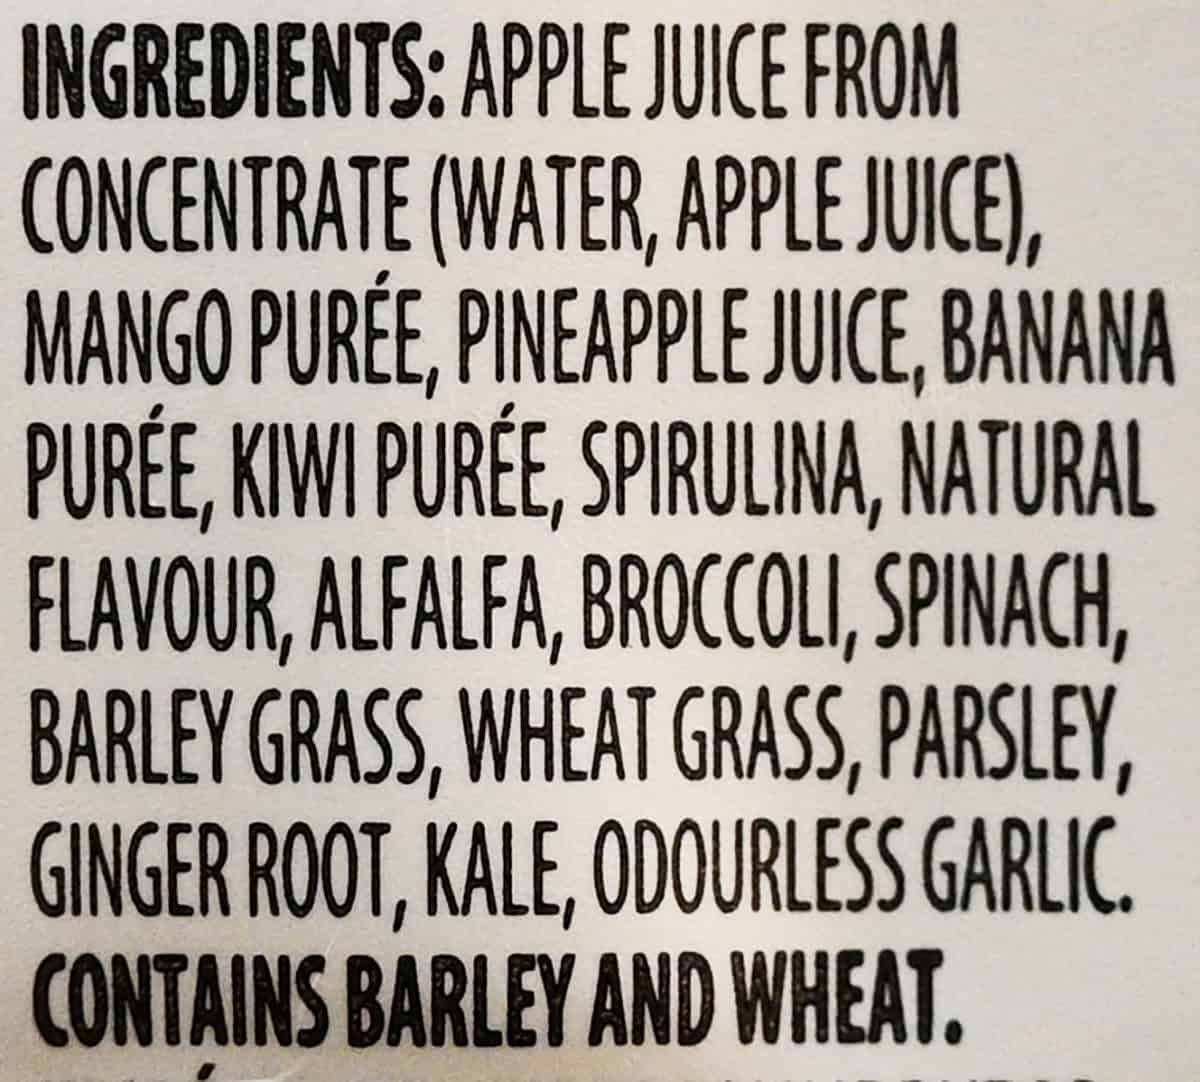 Green machine ingredients label from the back of the container.